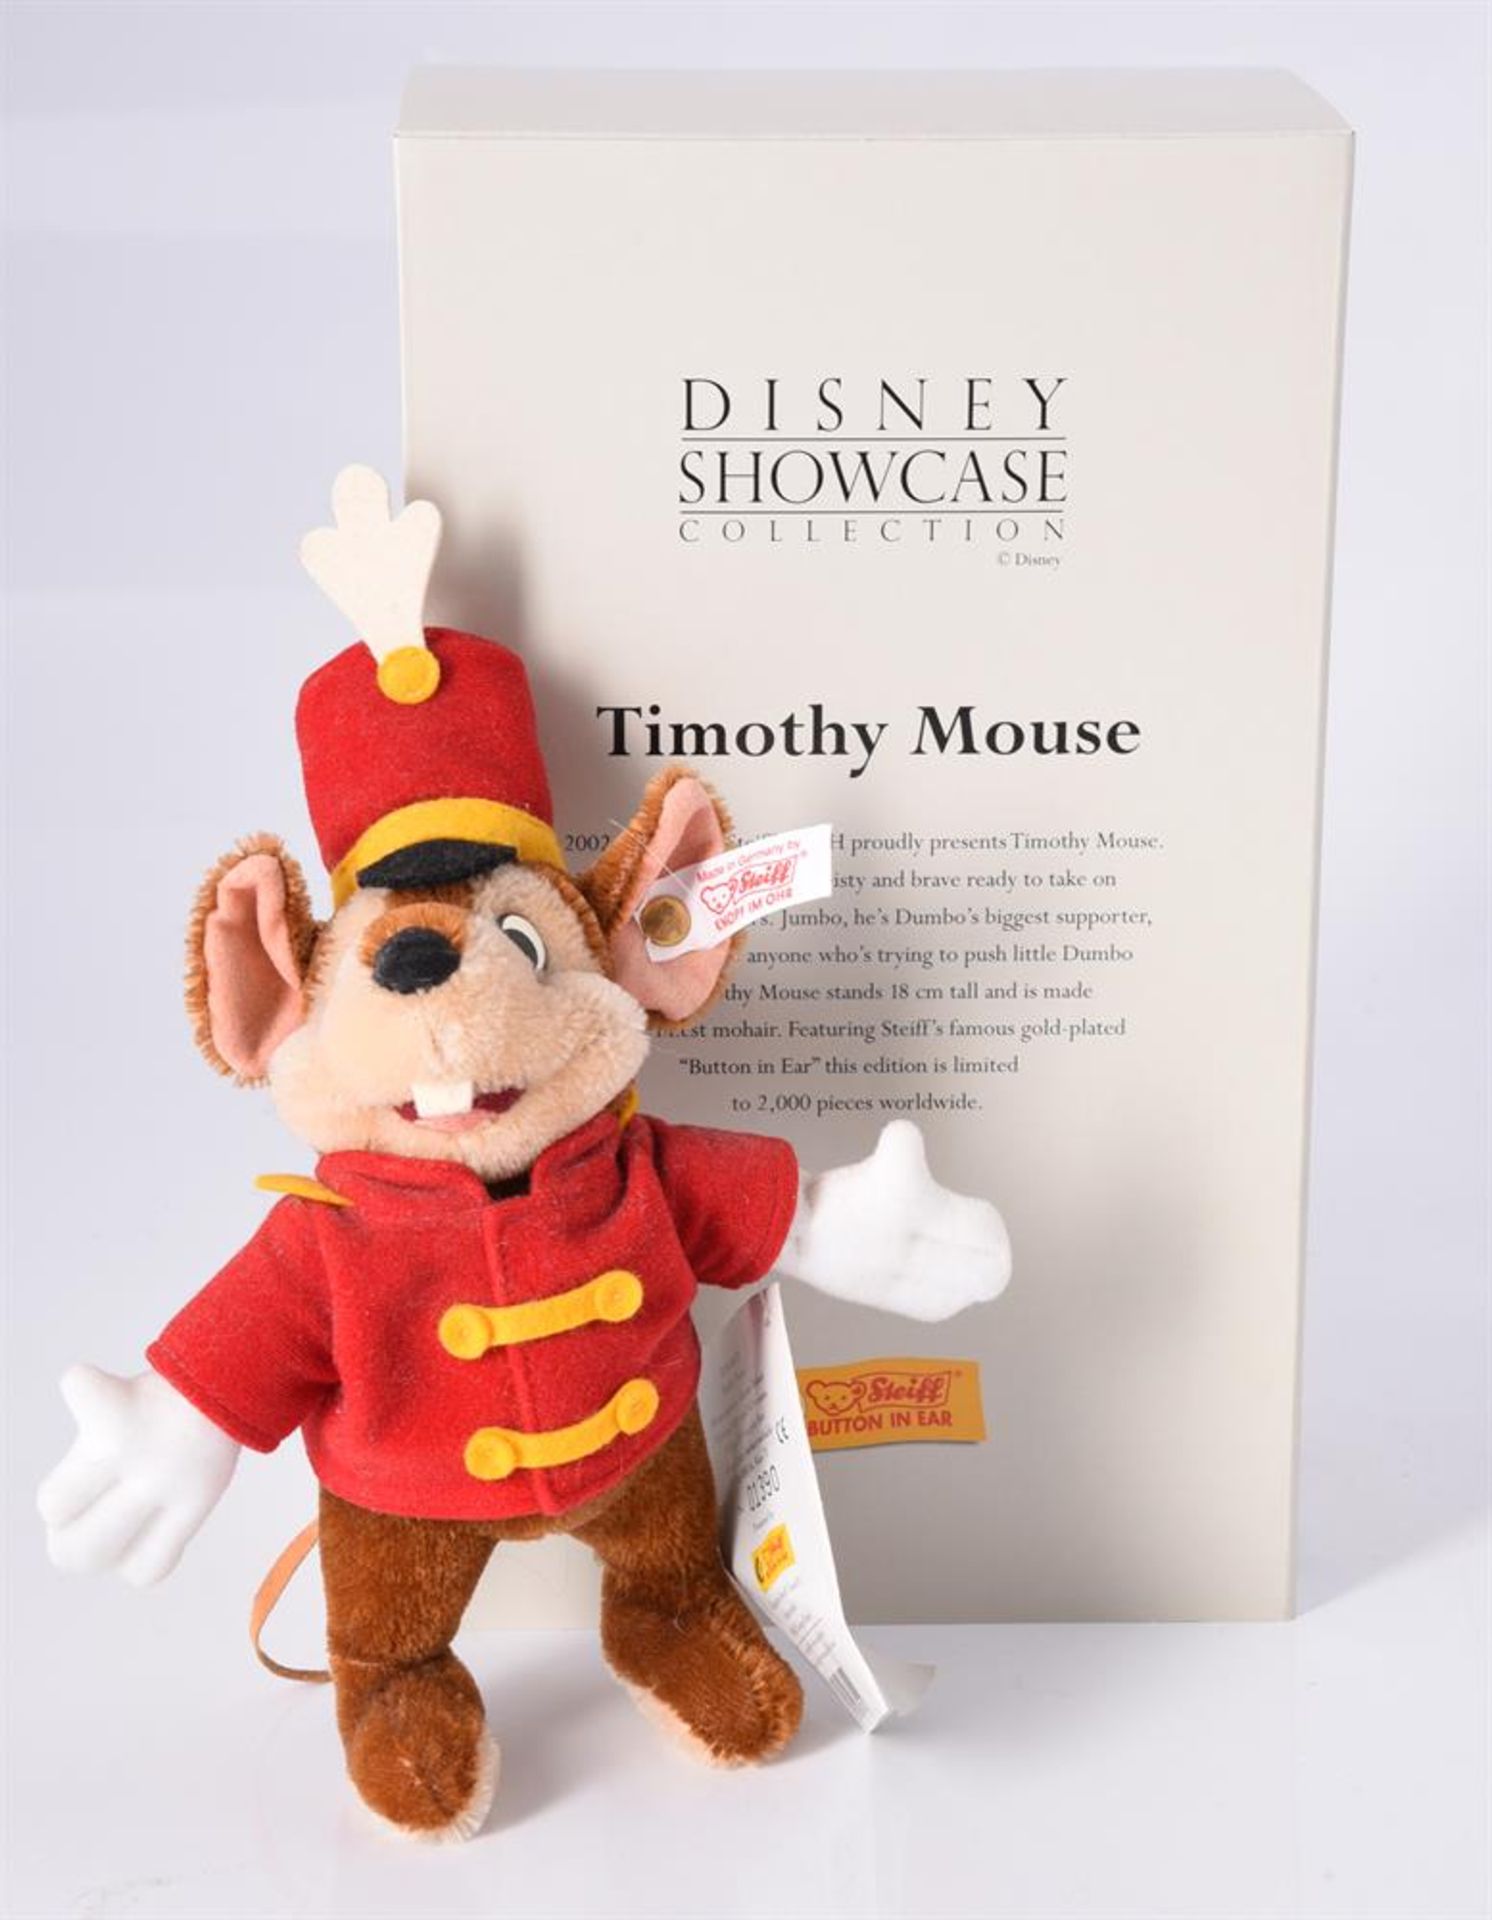 STEIFF, DUMBO AND TIMOTHY MOUSE, 00556 and 01390, DISNEY SHOWCASE COLLECTION, CIRCA 2002 - Bild 7 aus 7